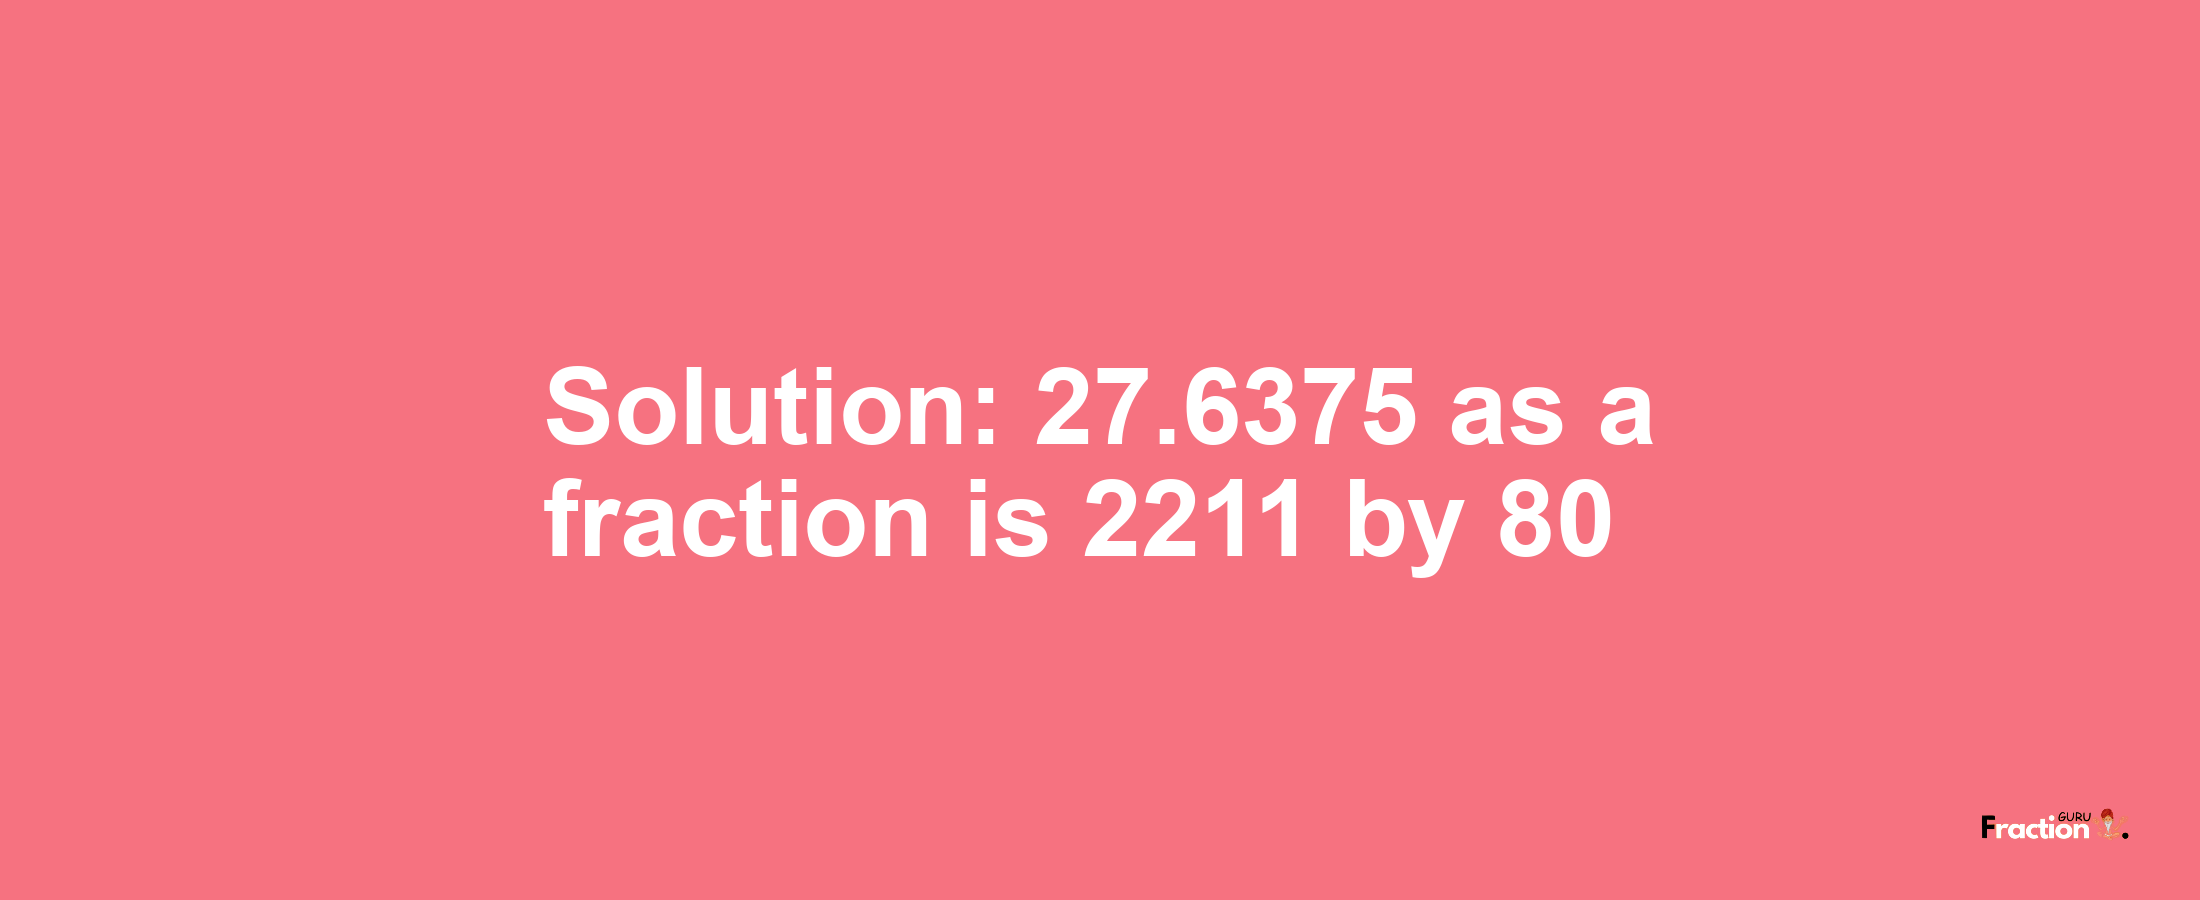 Solution:27.6375 as a fraction is 2211/80